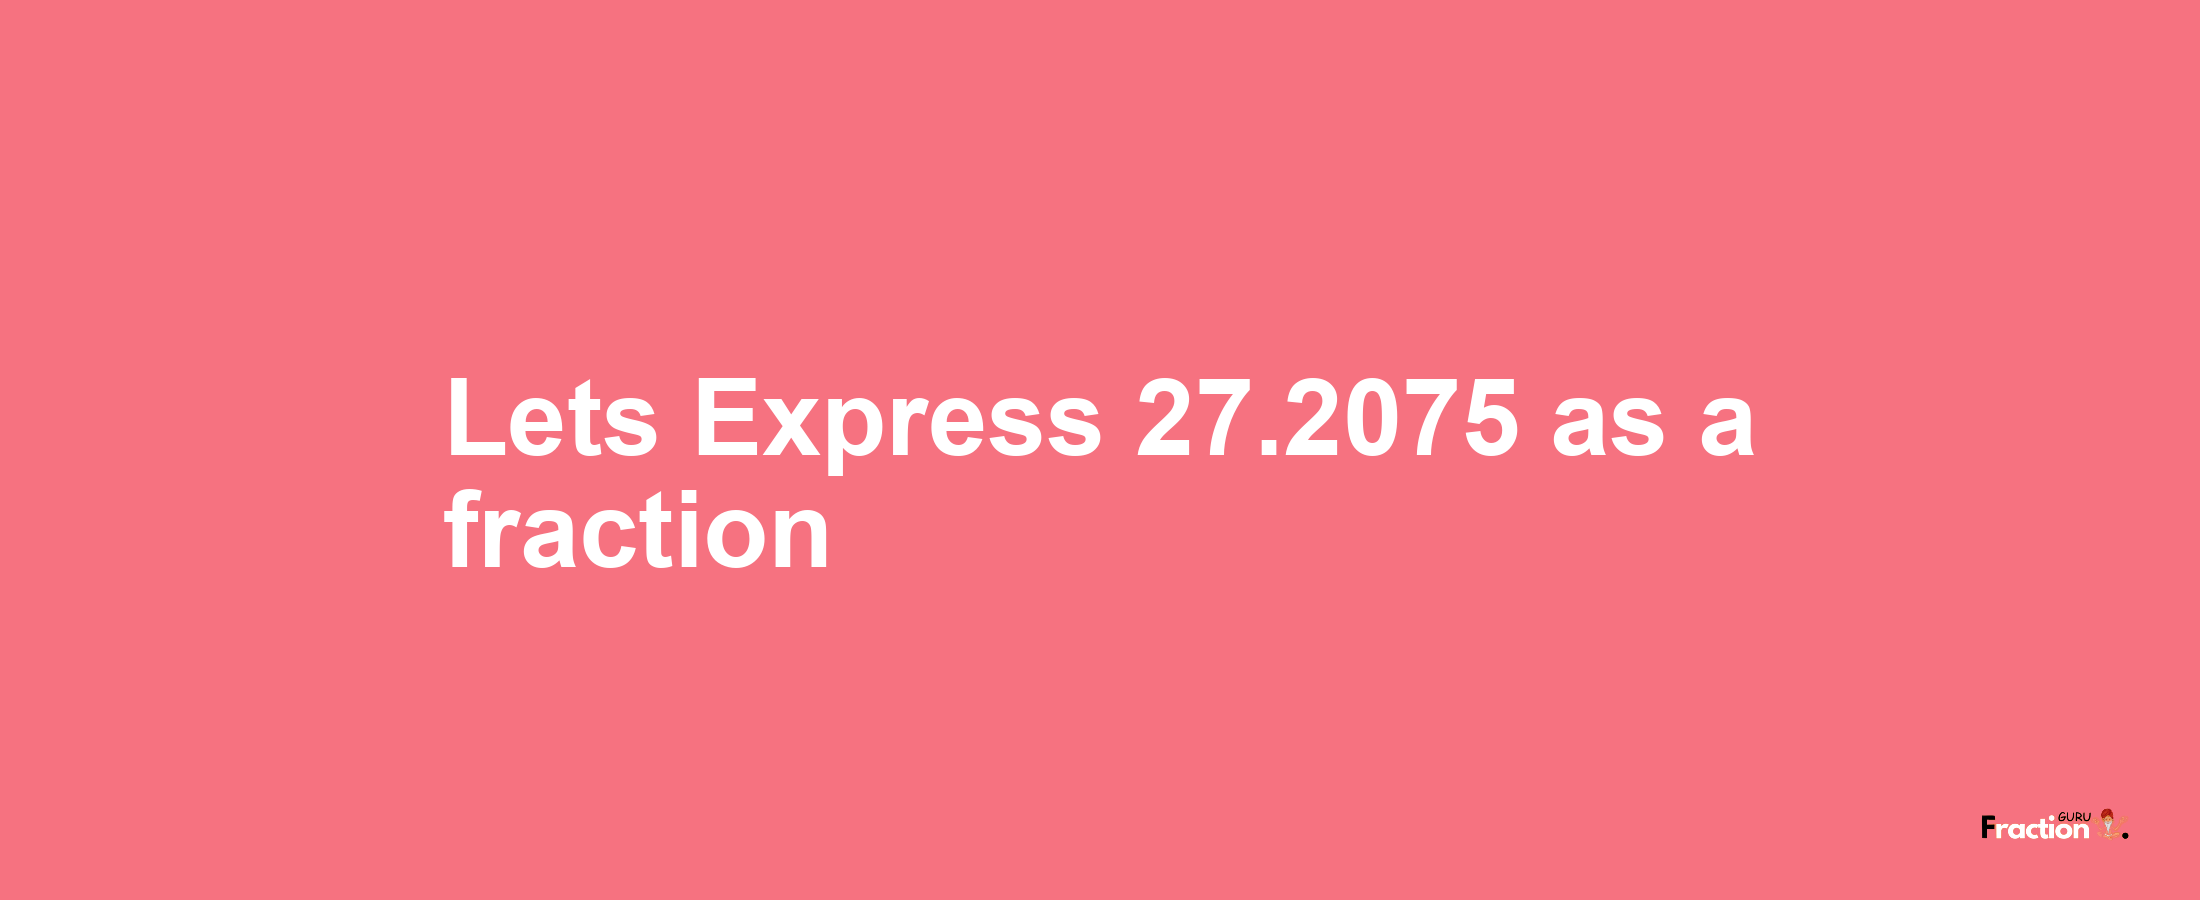 Lets Express 27.2075 as afraction